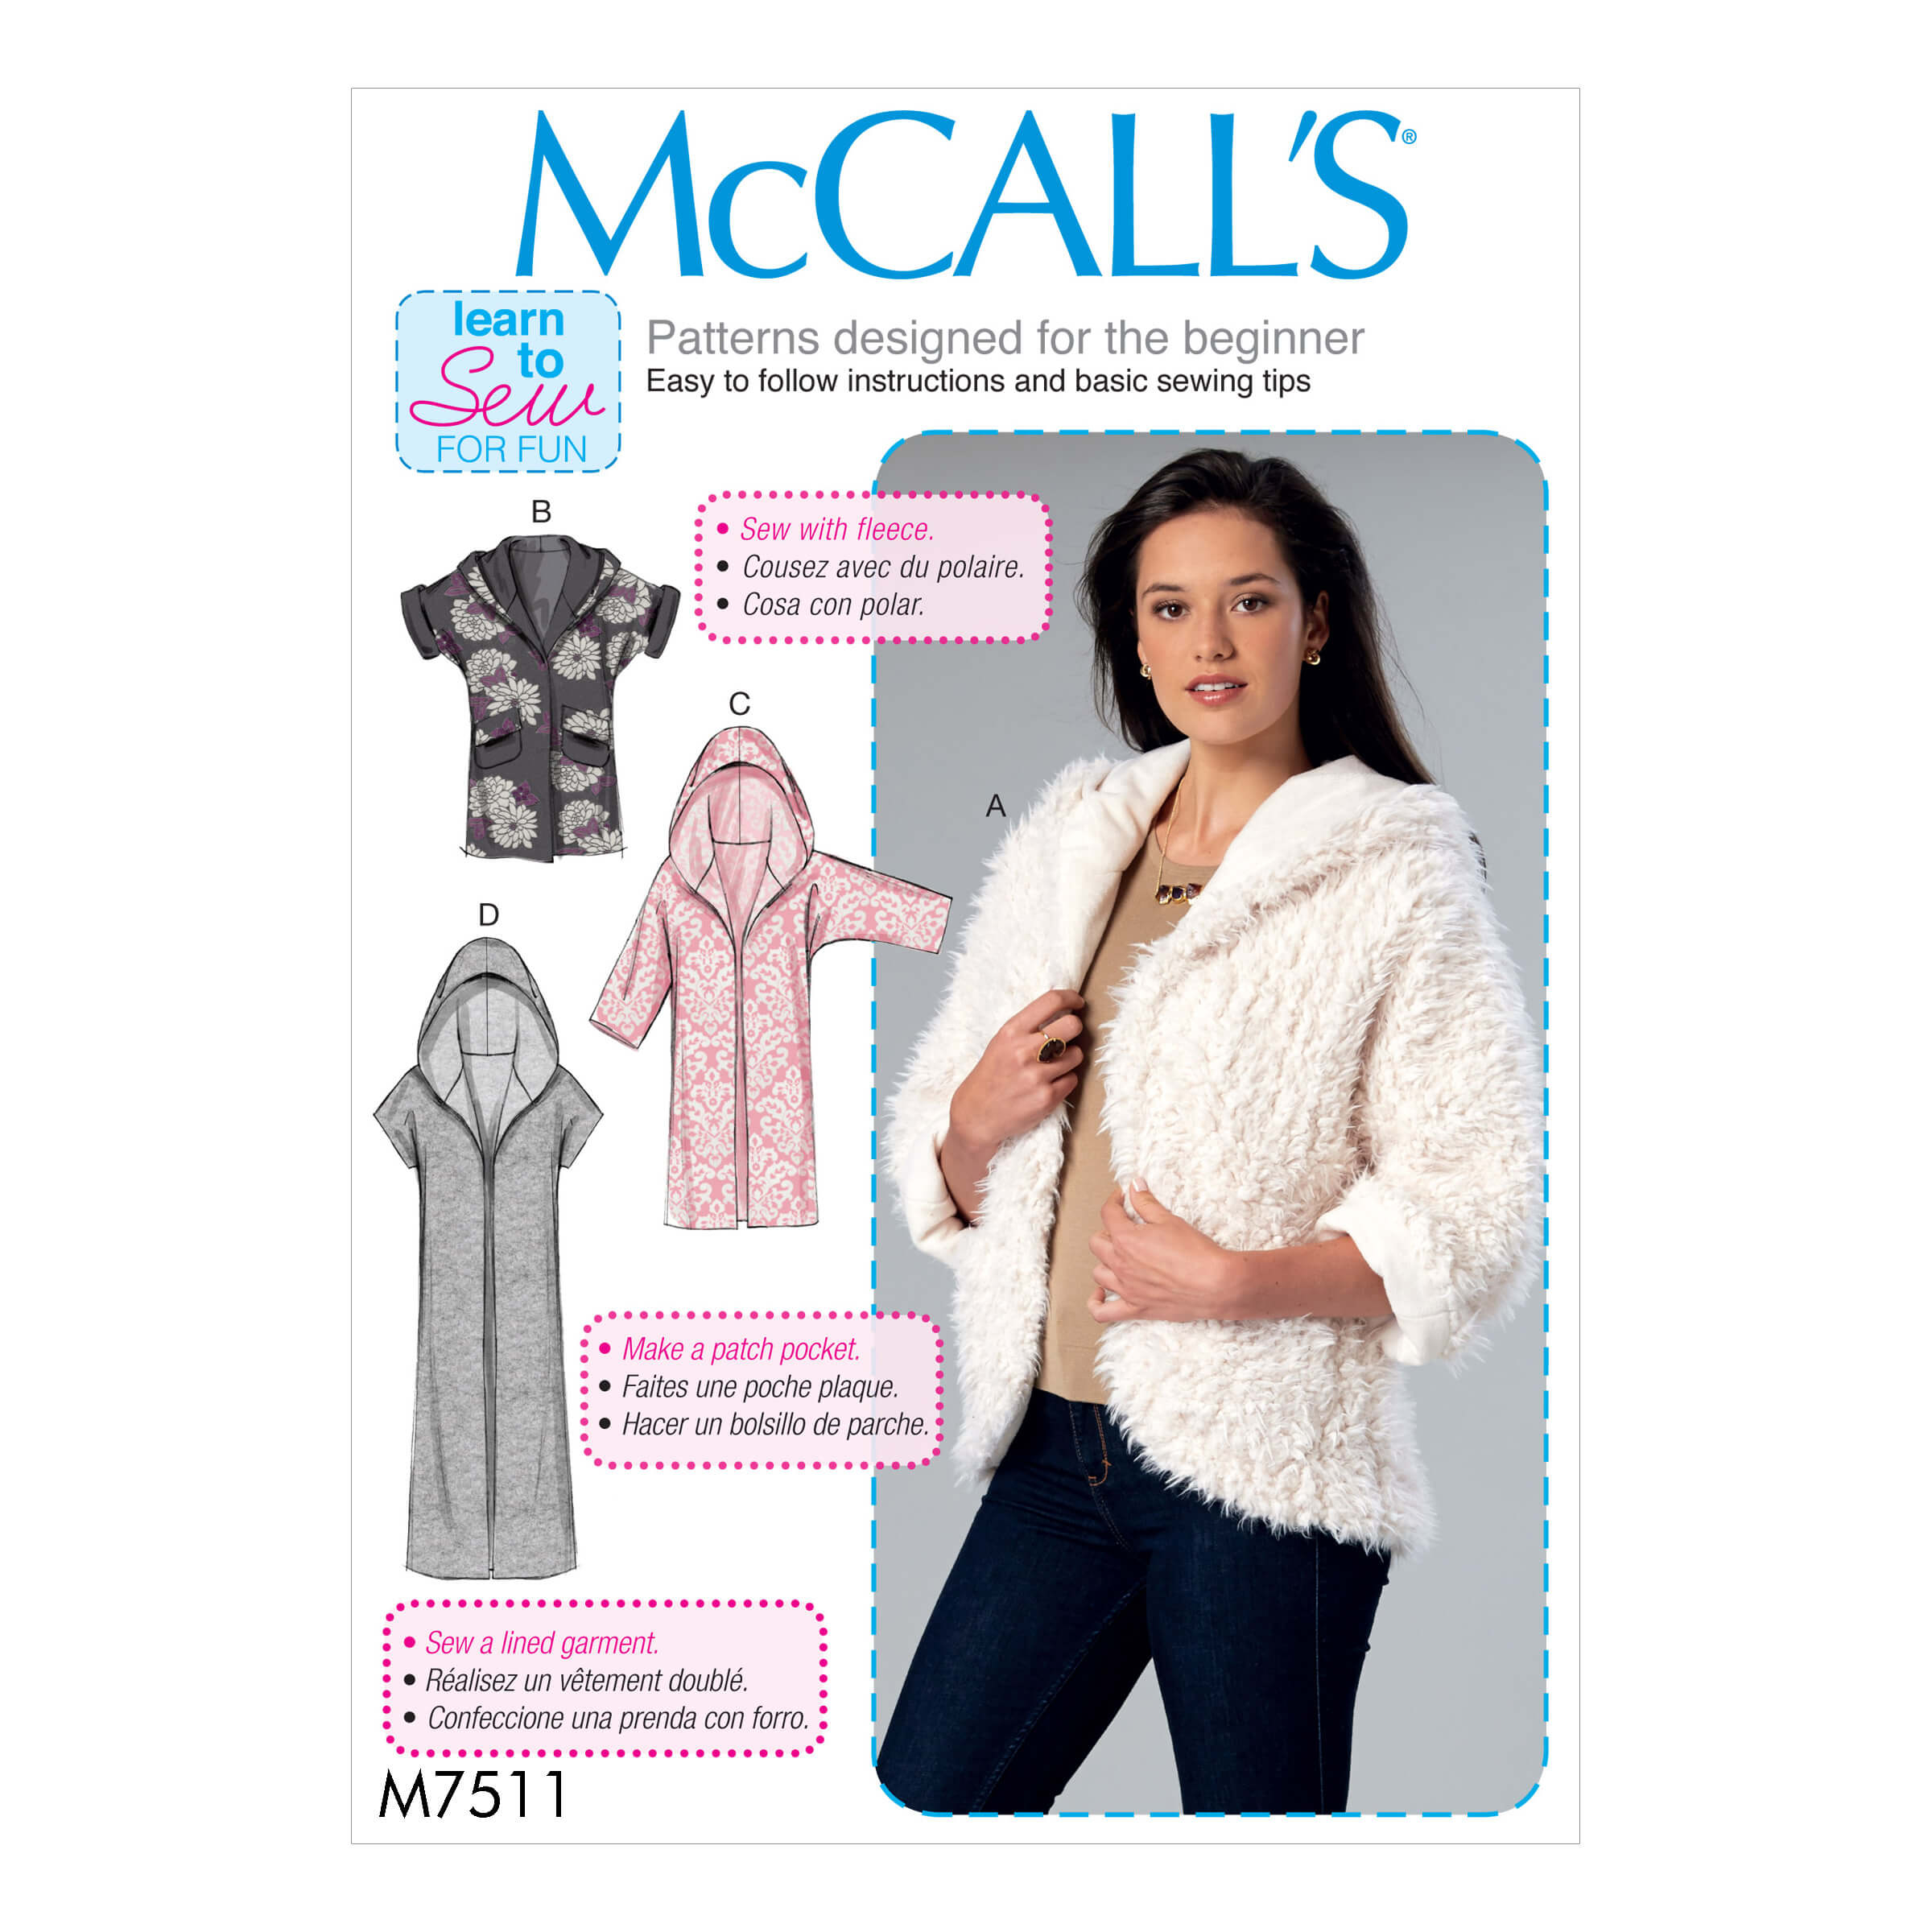 McCall's Sewing Pattern M7511 Misses' Open-Front Jackets with Shawl Collar and Hood